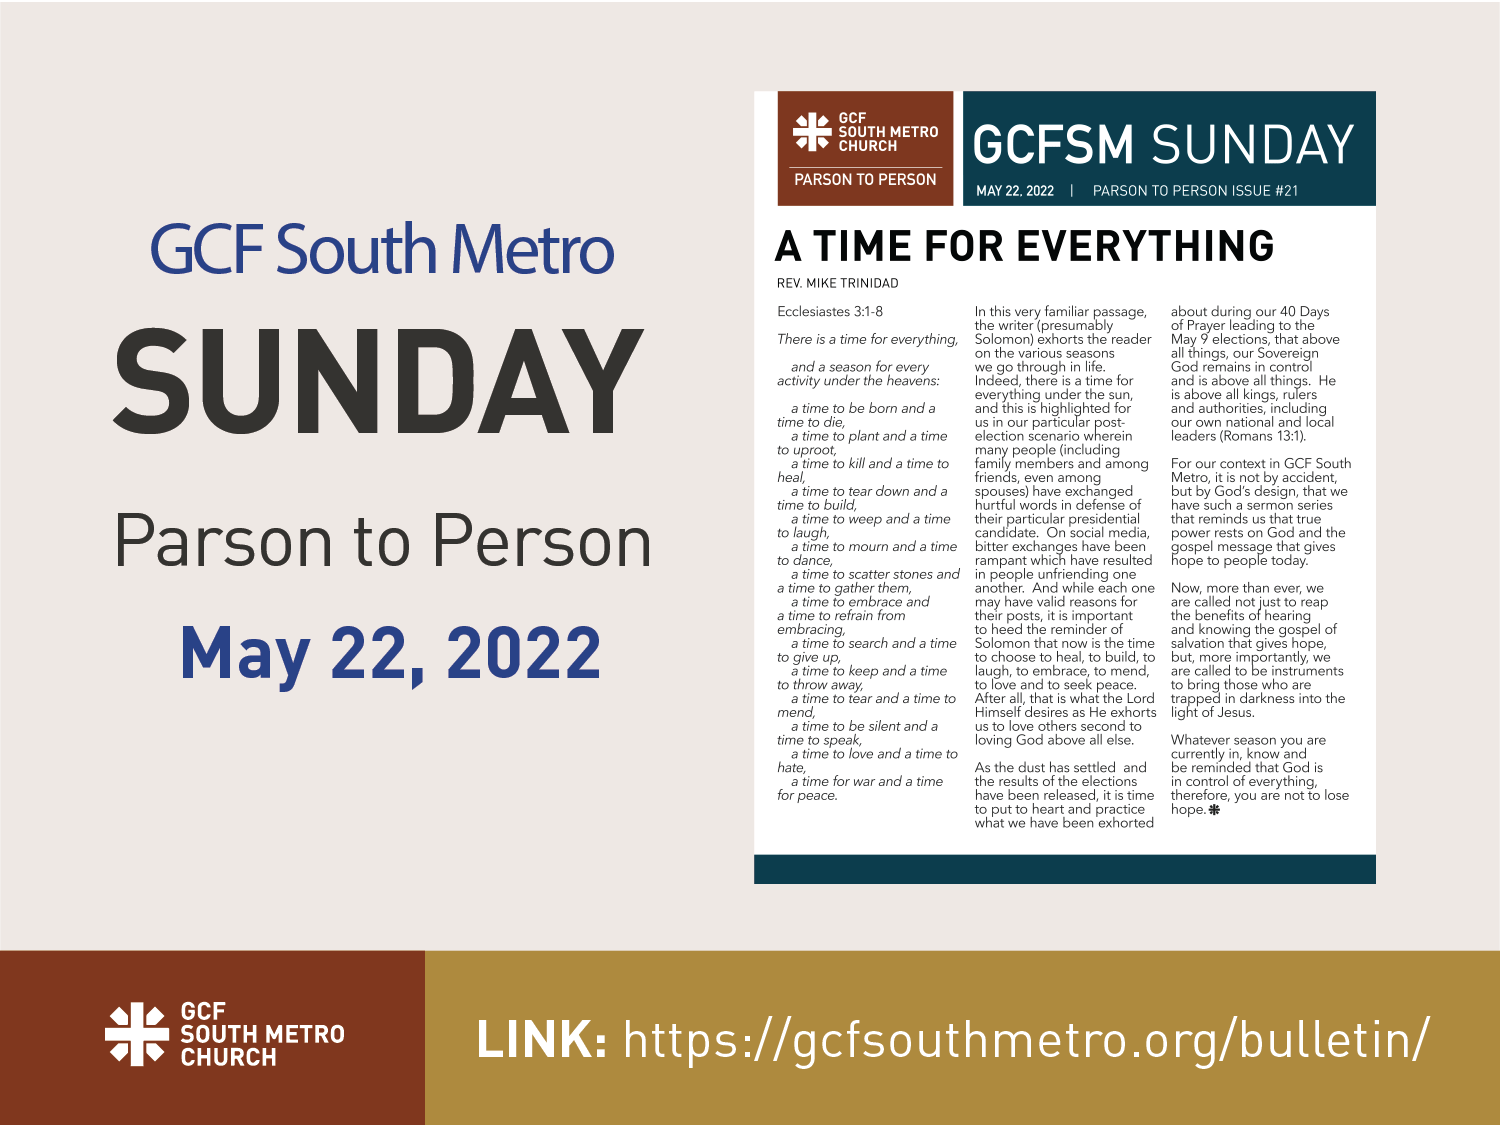 Sunday Bulletin – Parson to Person, May 22, 2022